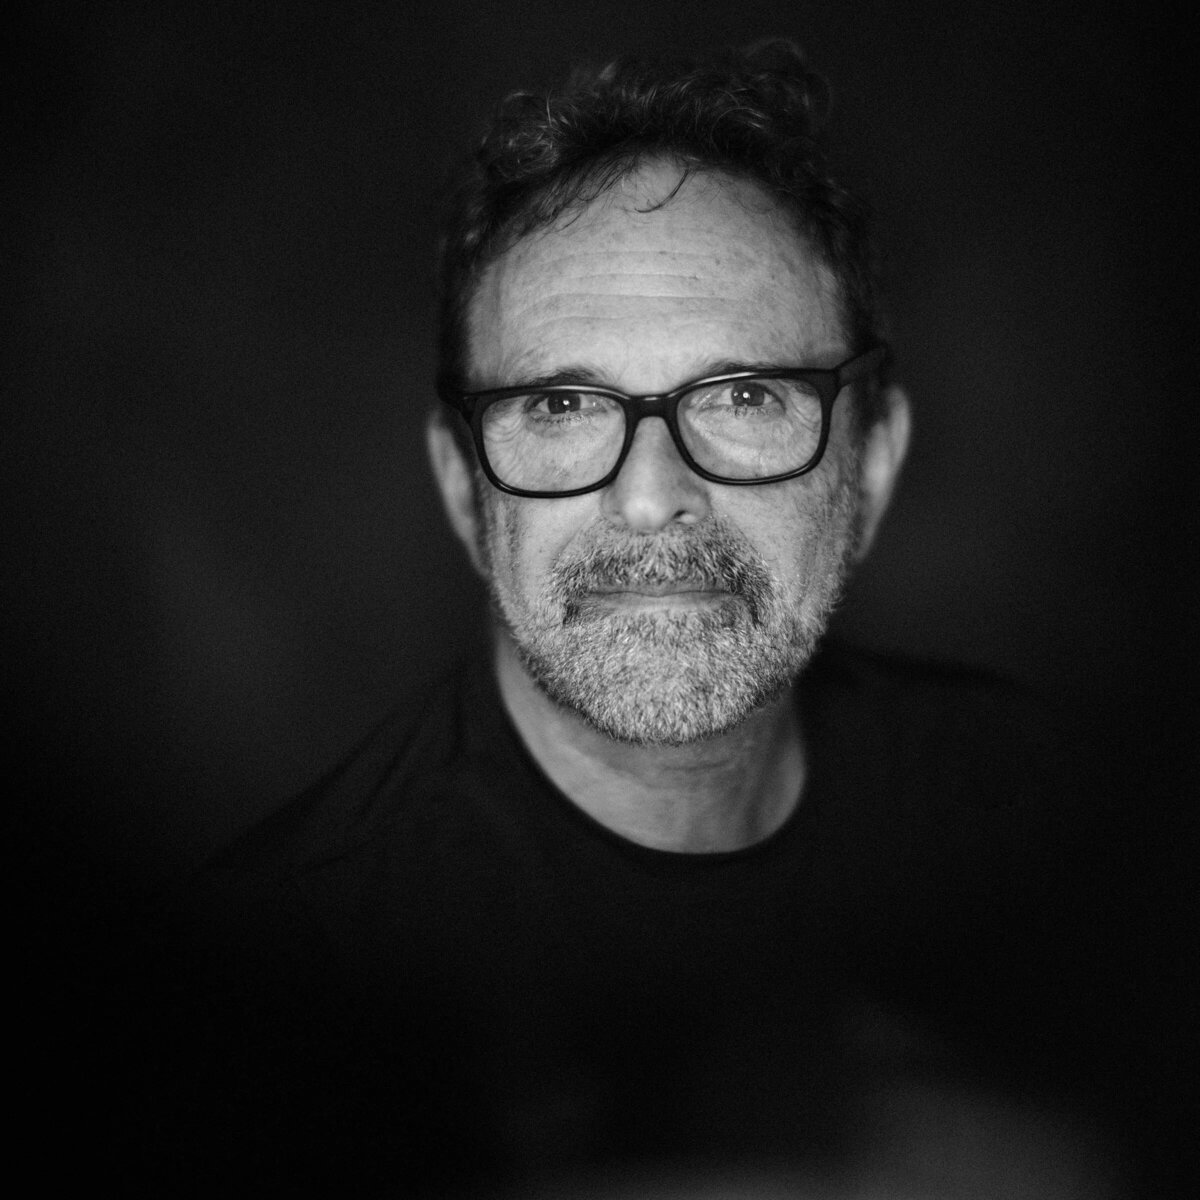 A man with glasses looking straight forward in black and white